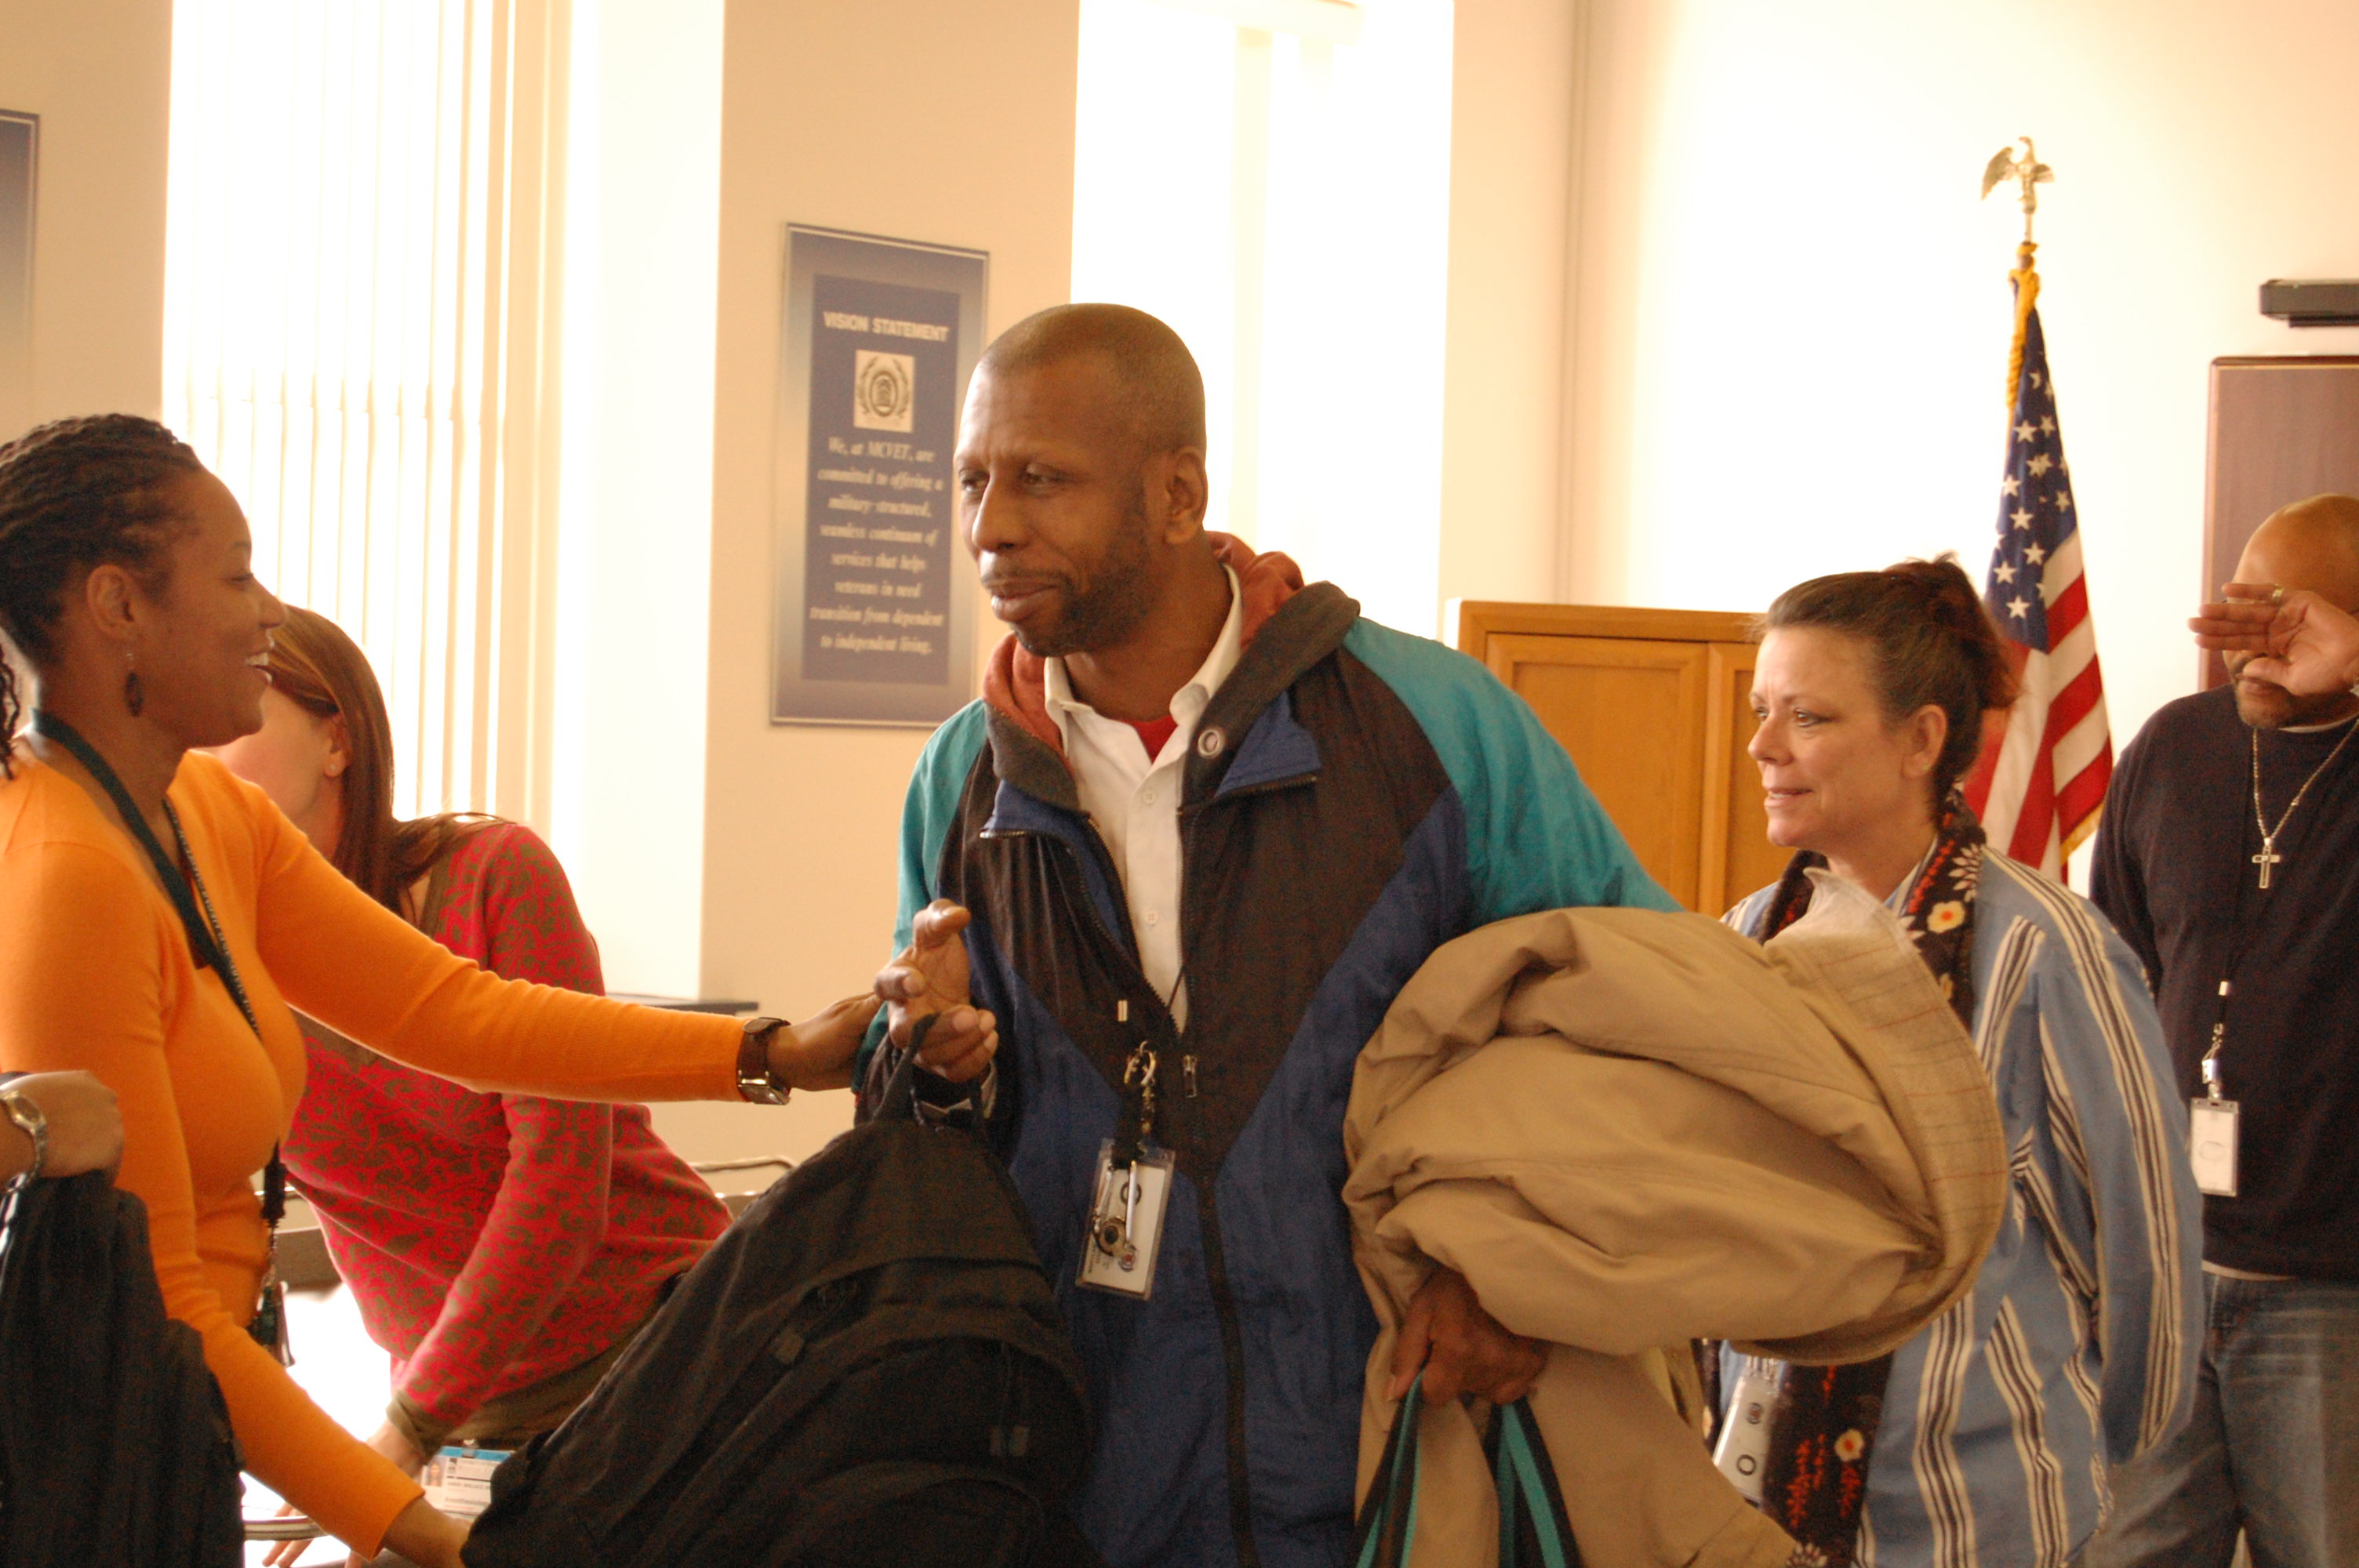 Anesthesiology Department staff hand each veteran their backpacks, and shake each of their hands.